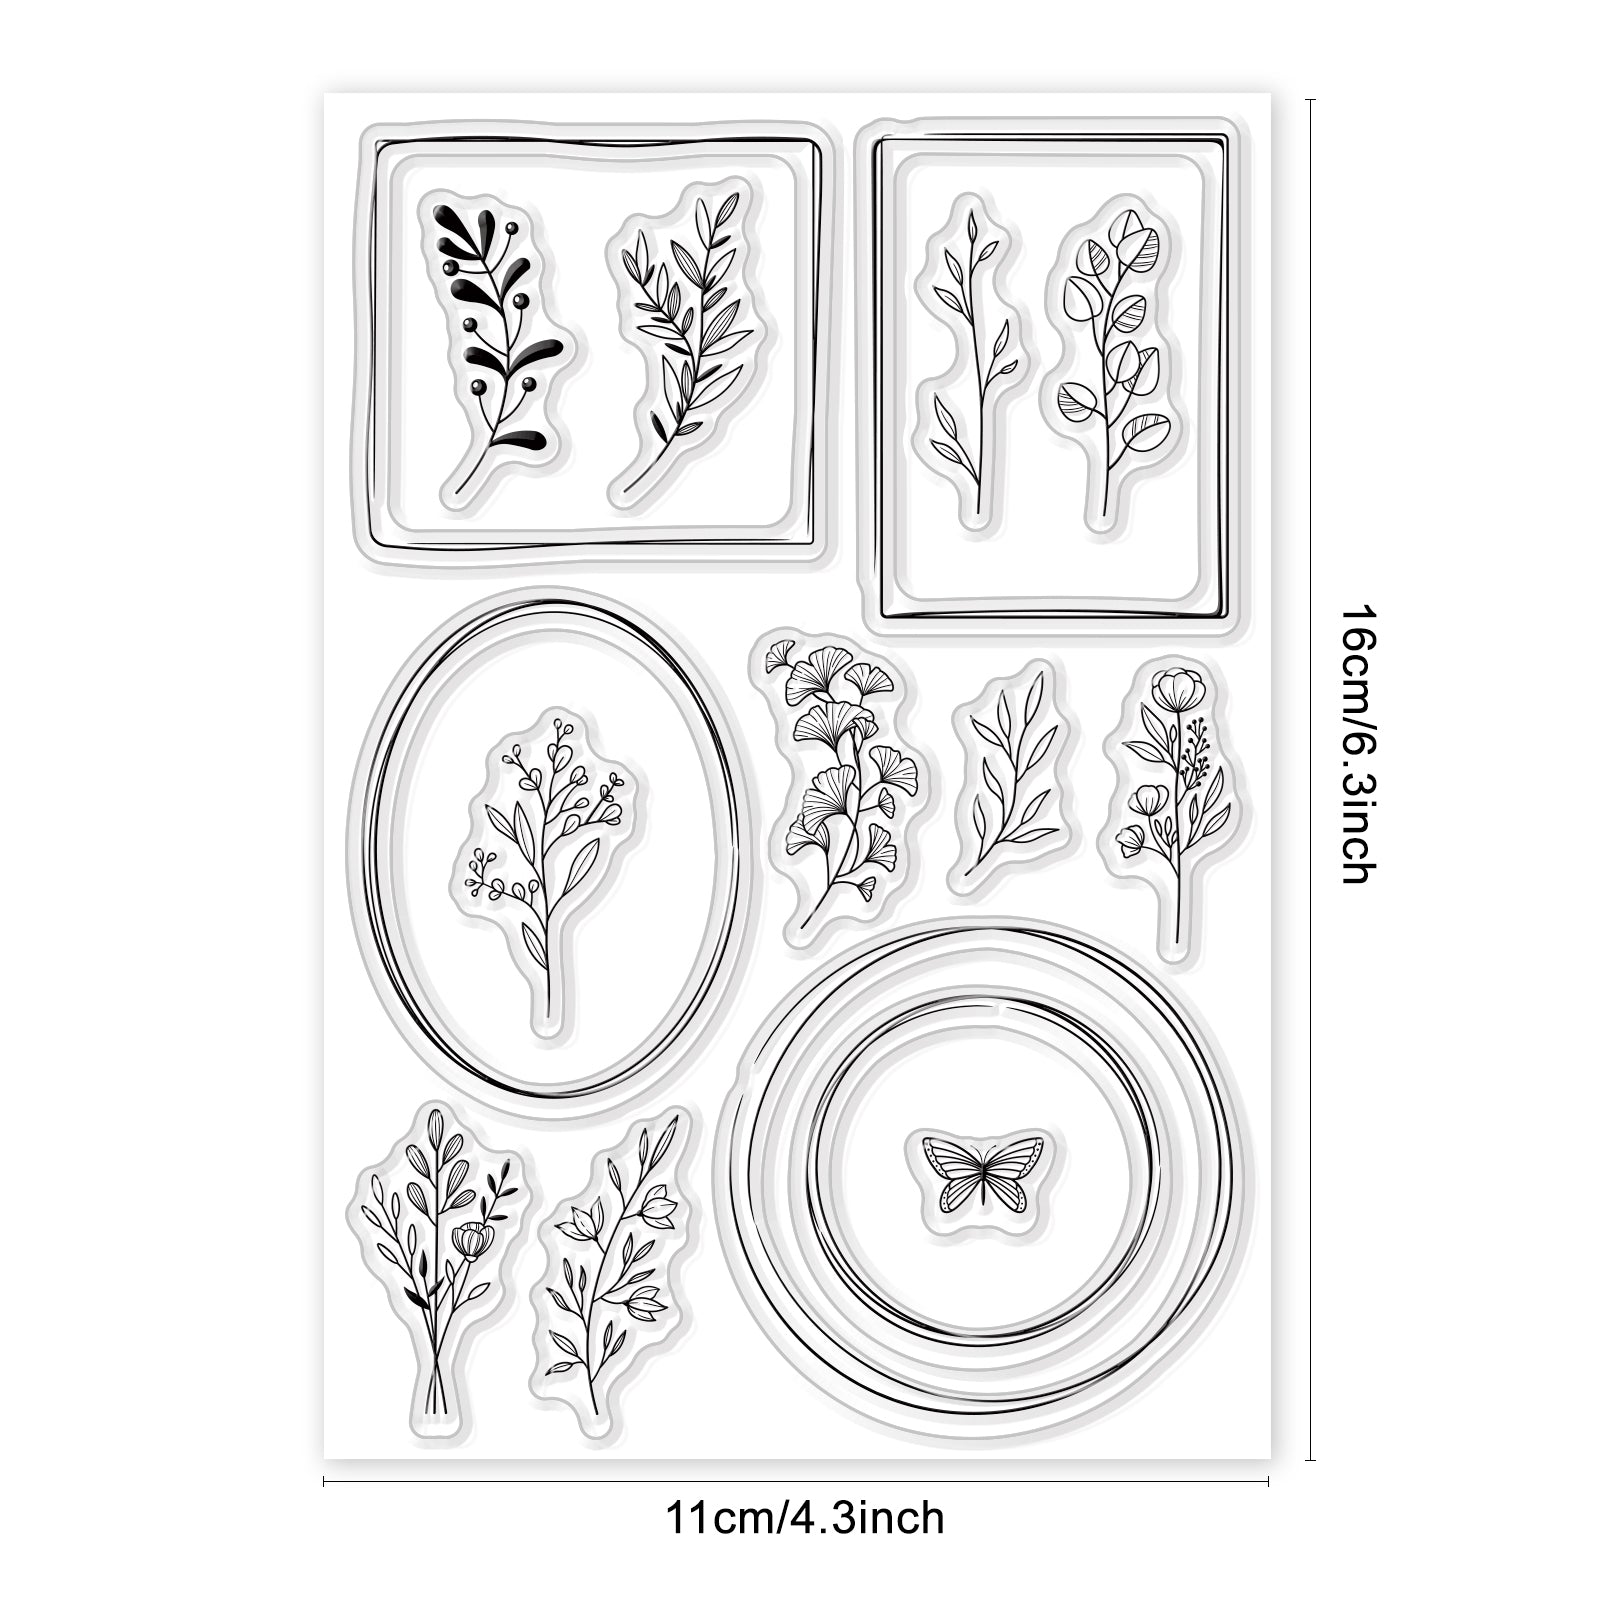 Globleland Plant Frame Clear Silicone Stamp Seal for Card Making Decoration and DIY Scrapbooking